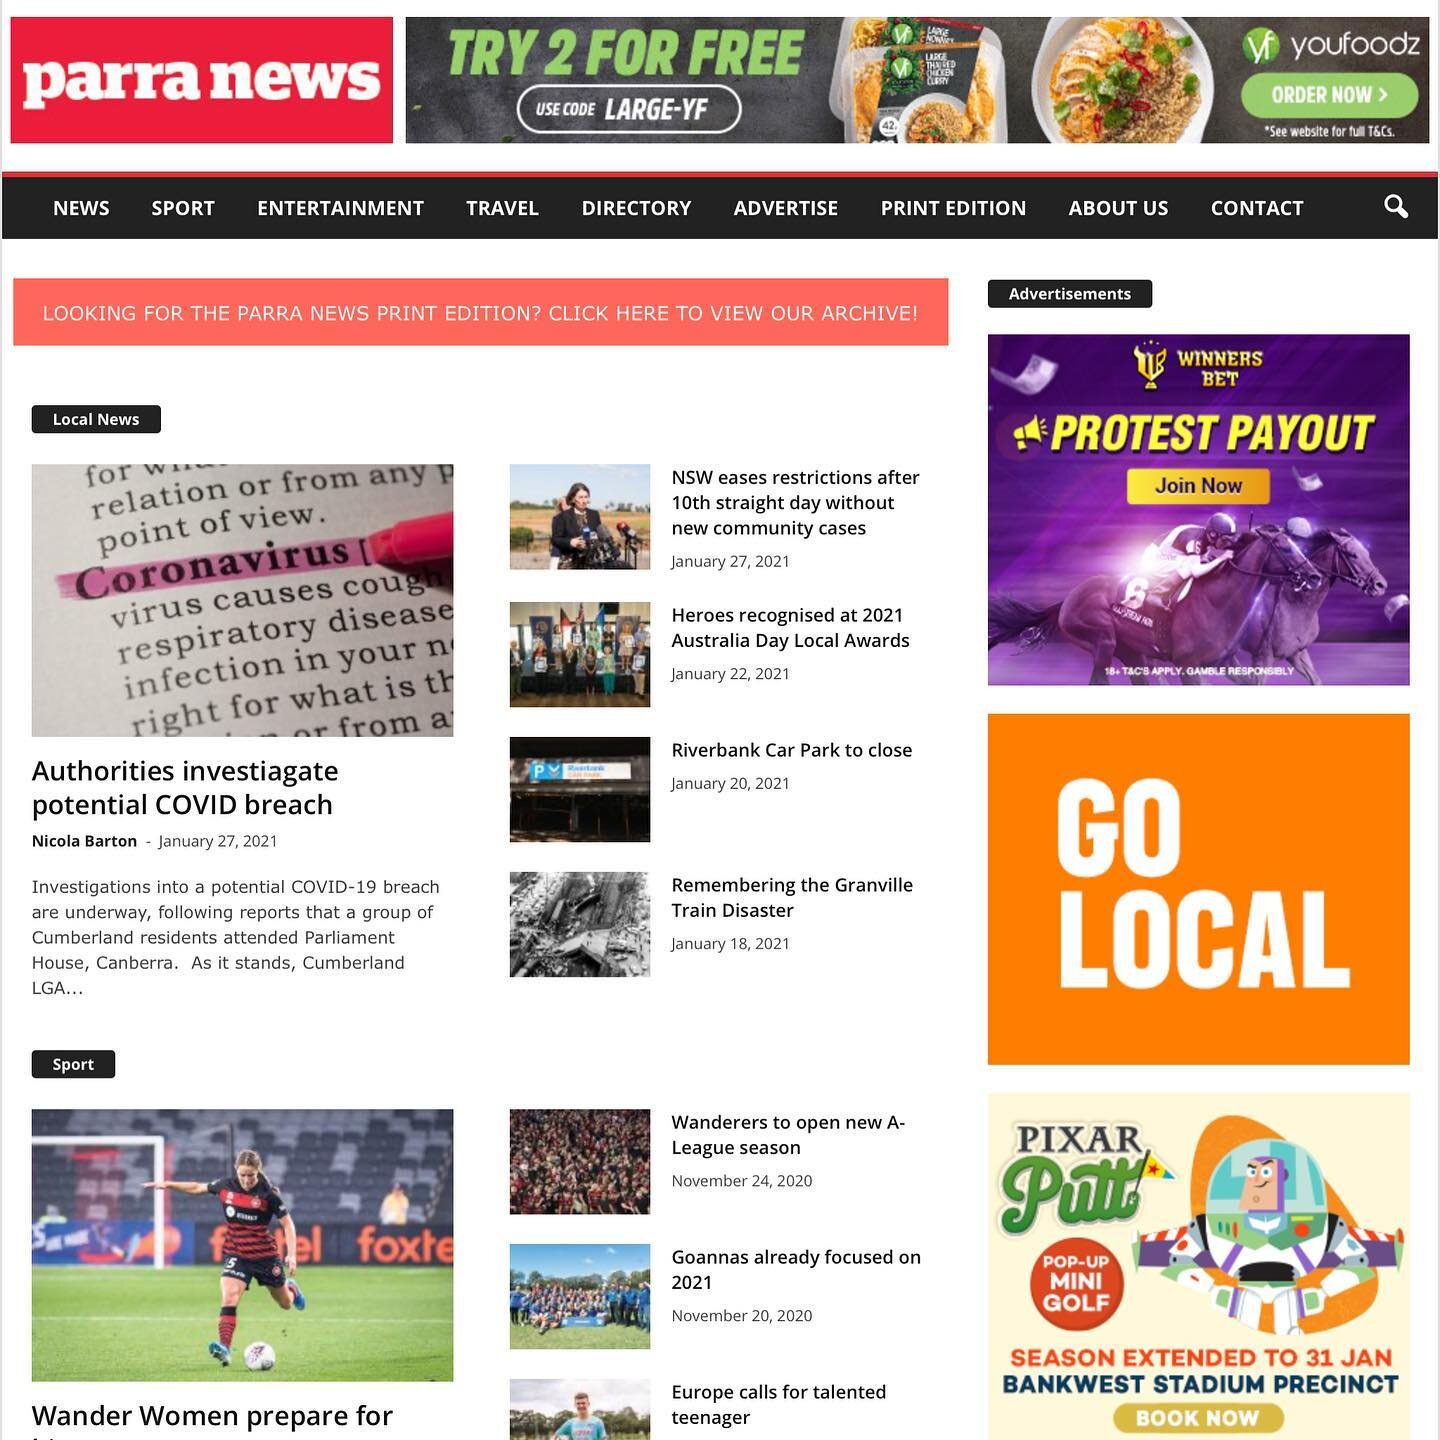 A shout out to @theparranews for their ongoing support and commitment. #theparranews team is dedicated to providing up-to-date info on what&rsquo;s happening in our community. Both a print and digital news service, it&rsquo;s an independent publicati